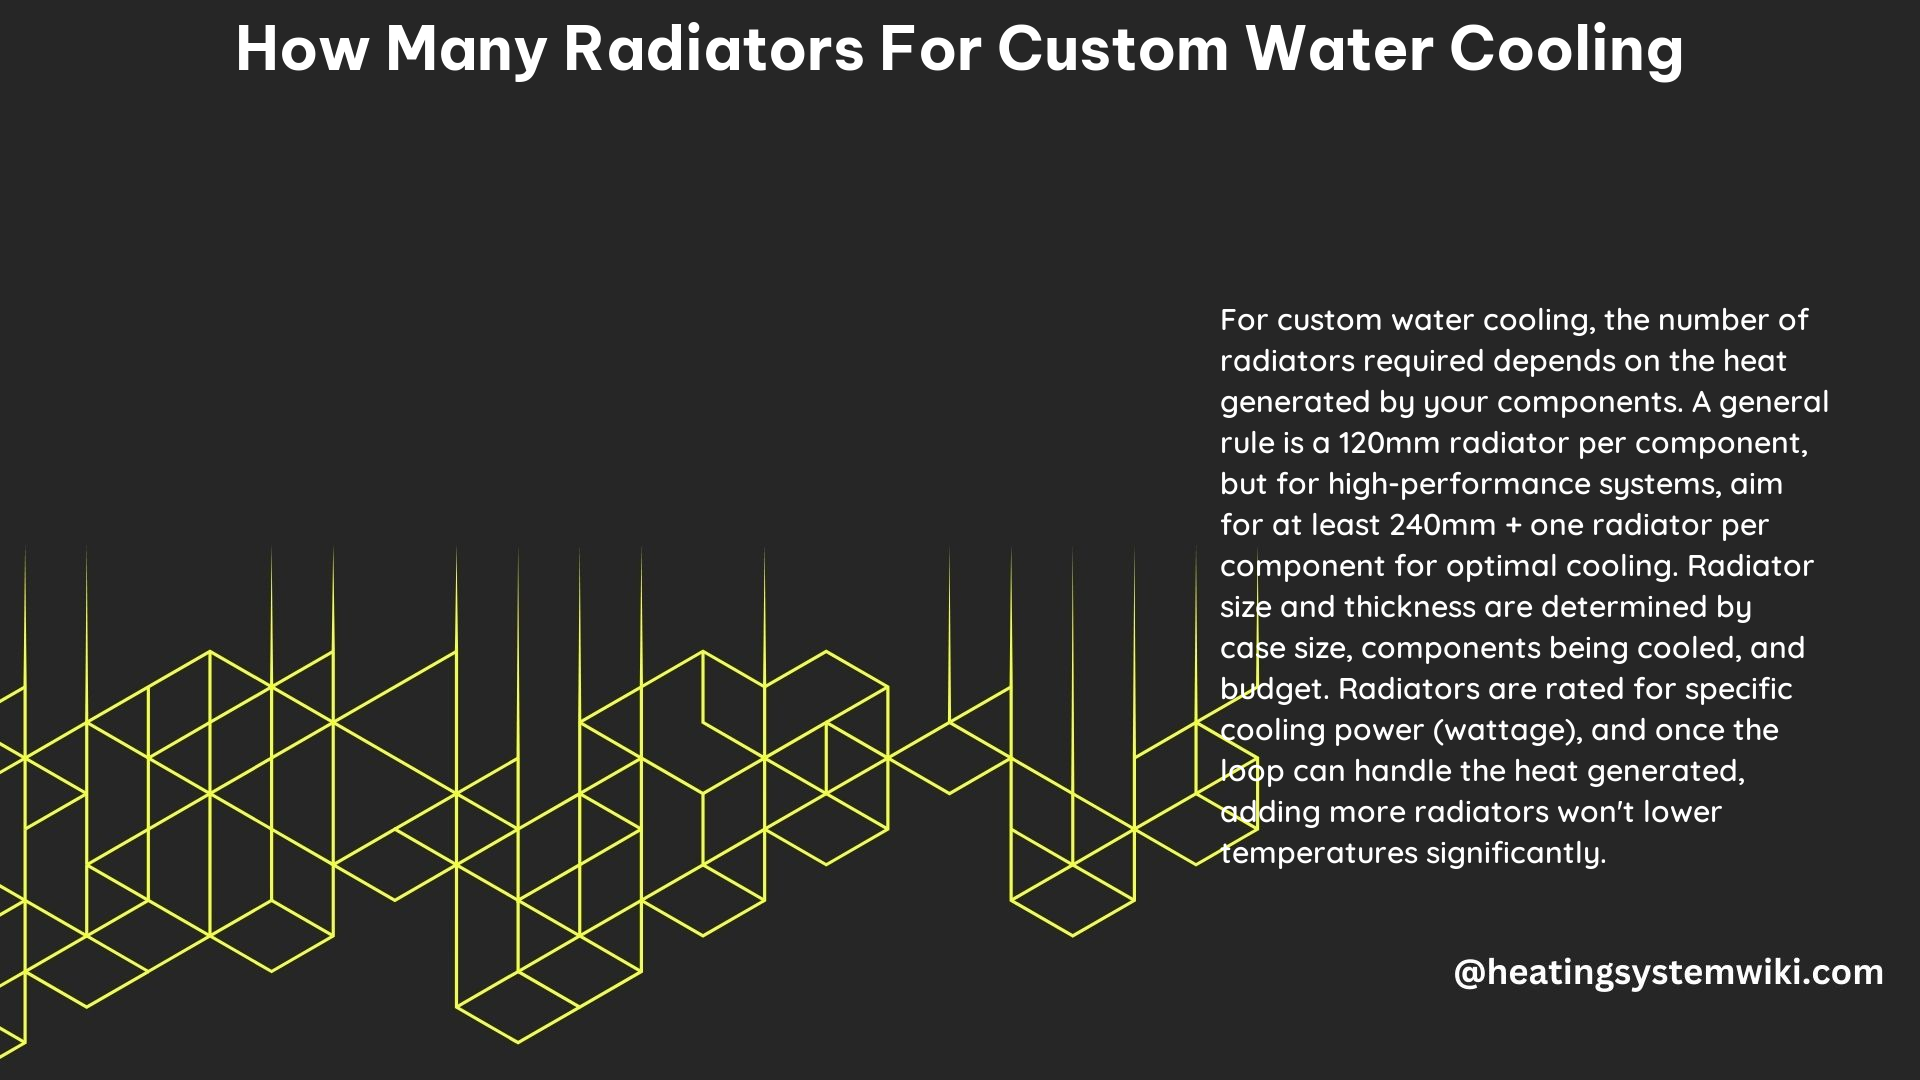 How Many Radiators for Custom Water Cooling